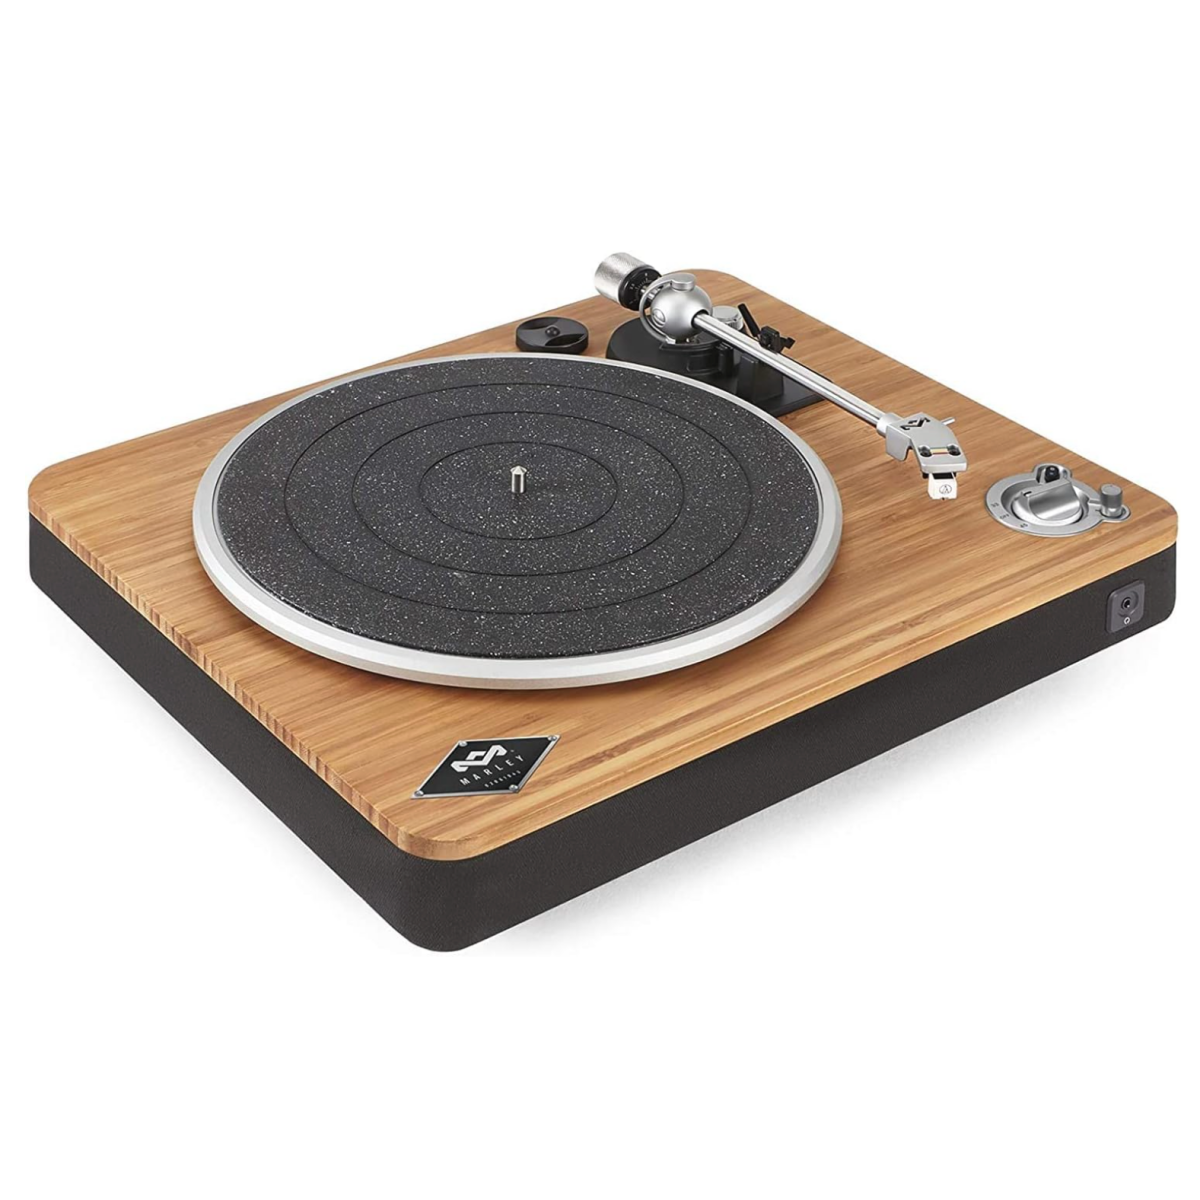 A House of Marley Stir It Up turntable